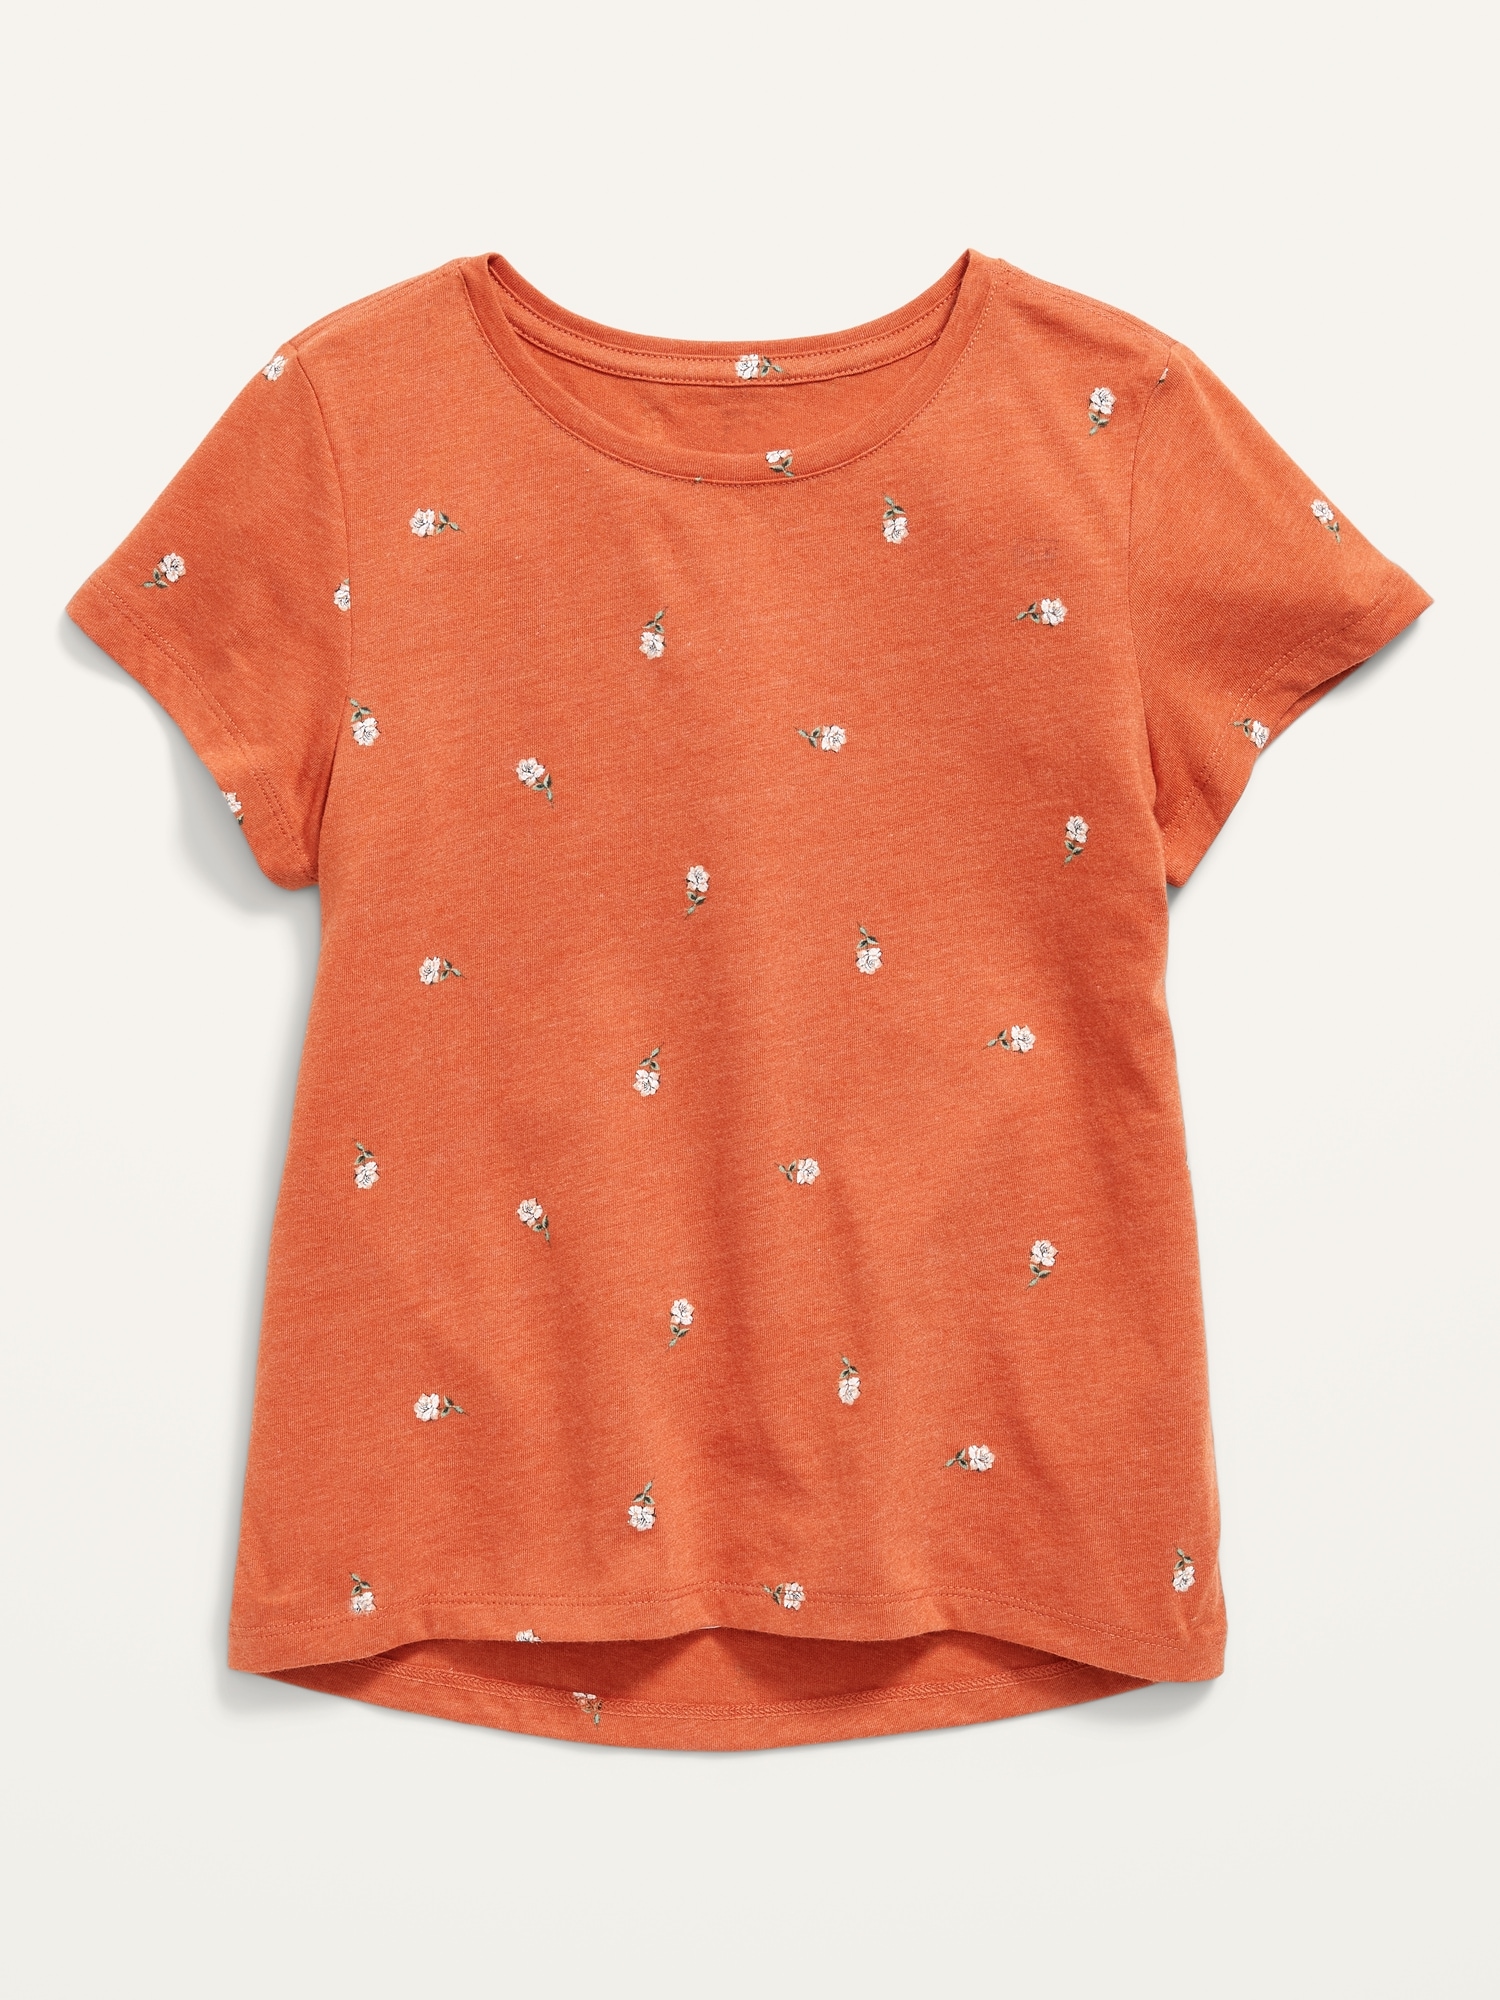 Old Navy Softest Printed Scoop-Neck T-Shirt for Girls red. 1